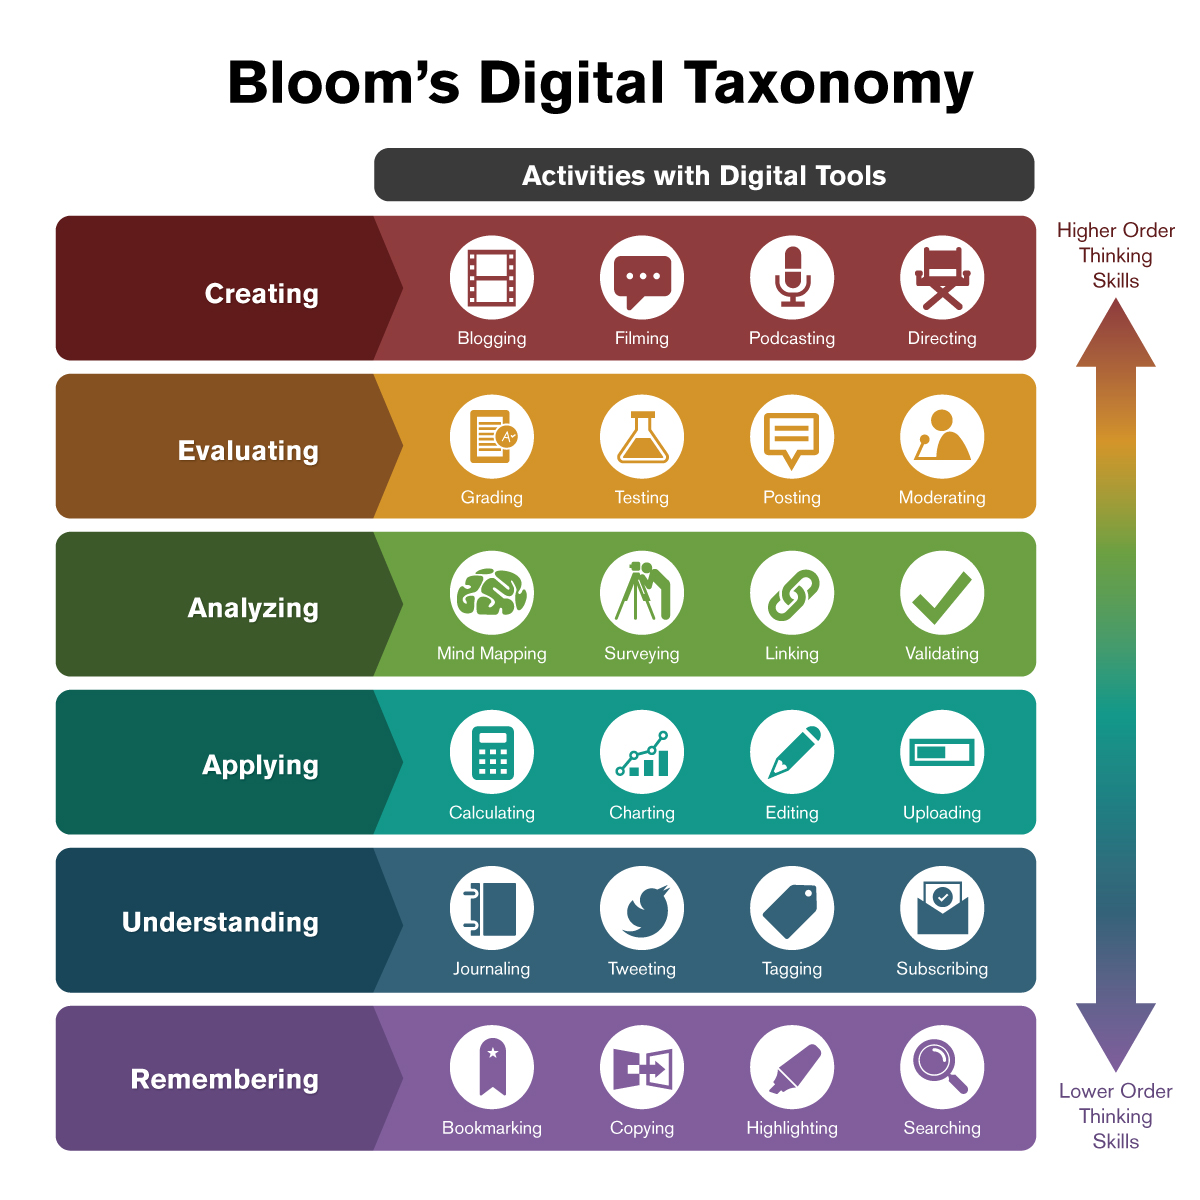 diagram showing the six elements of Bloom's Digital Taxonomy - creating, evaluating, analyzing, applying, understanding, remembering 